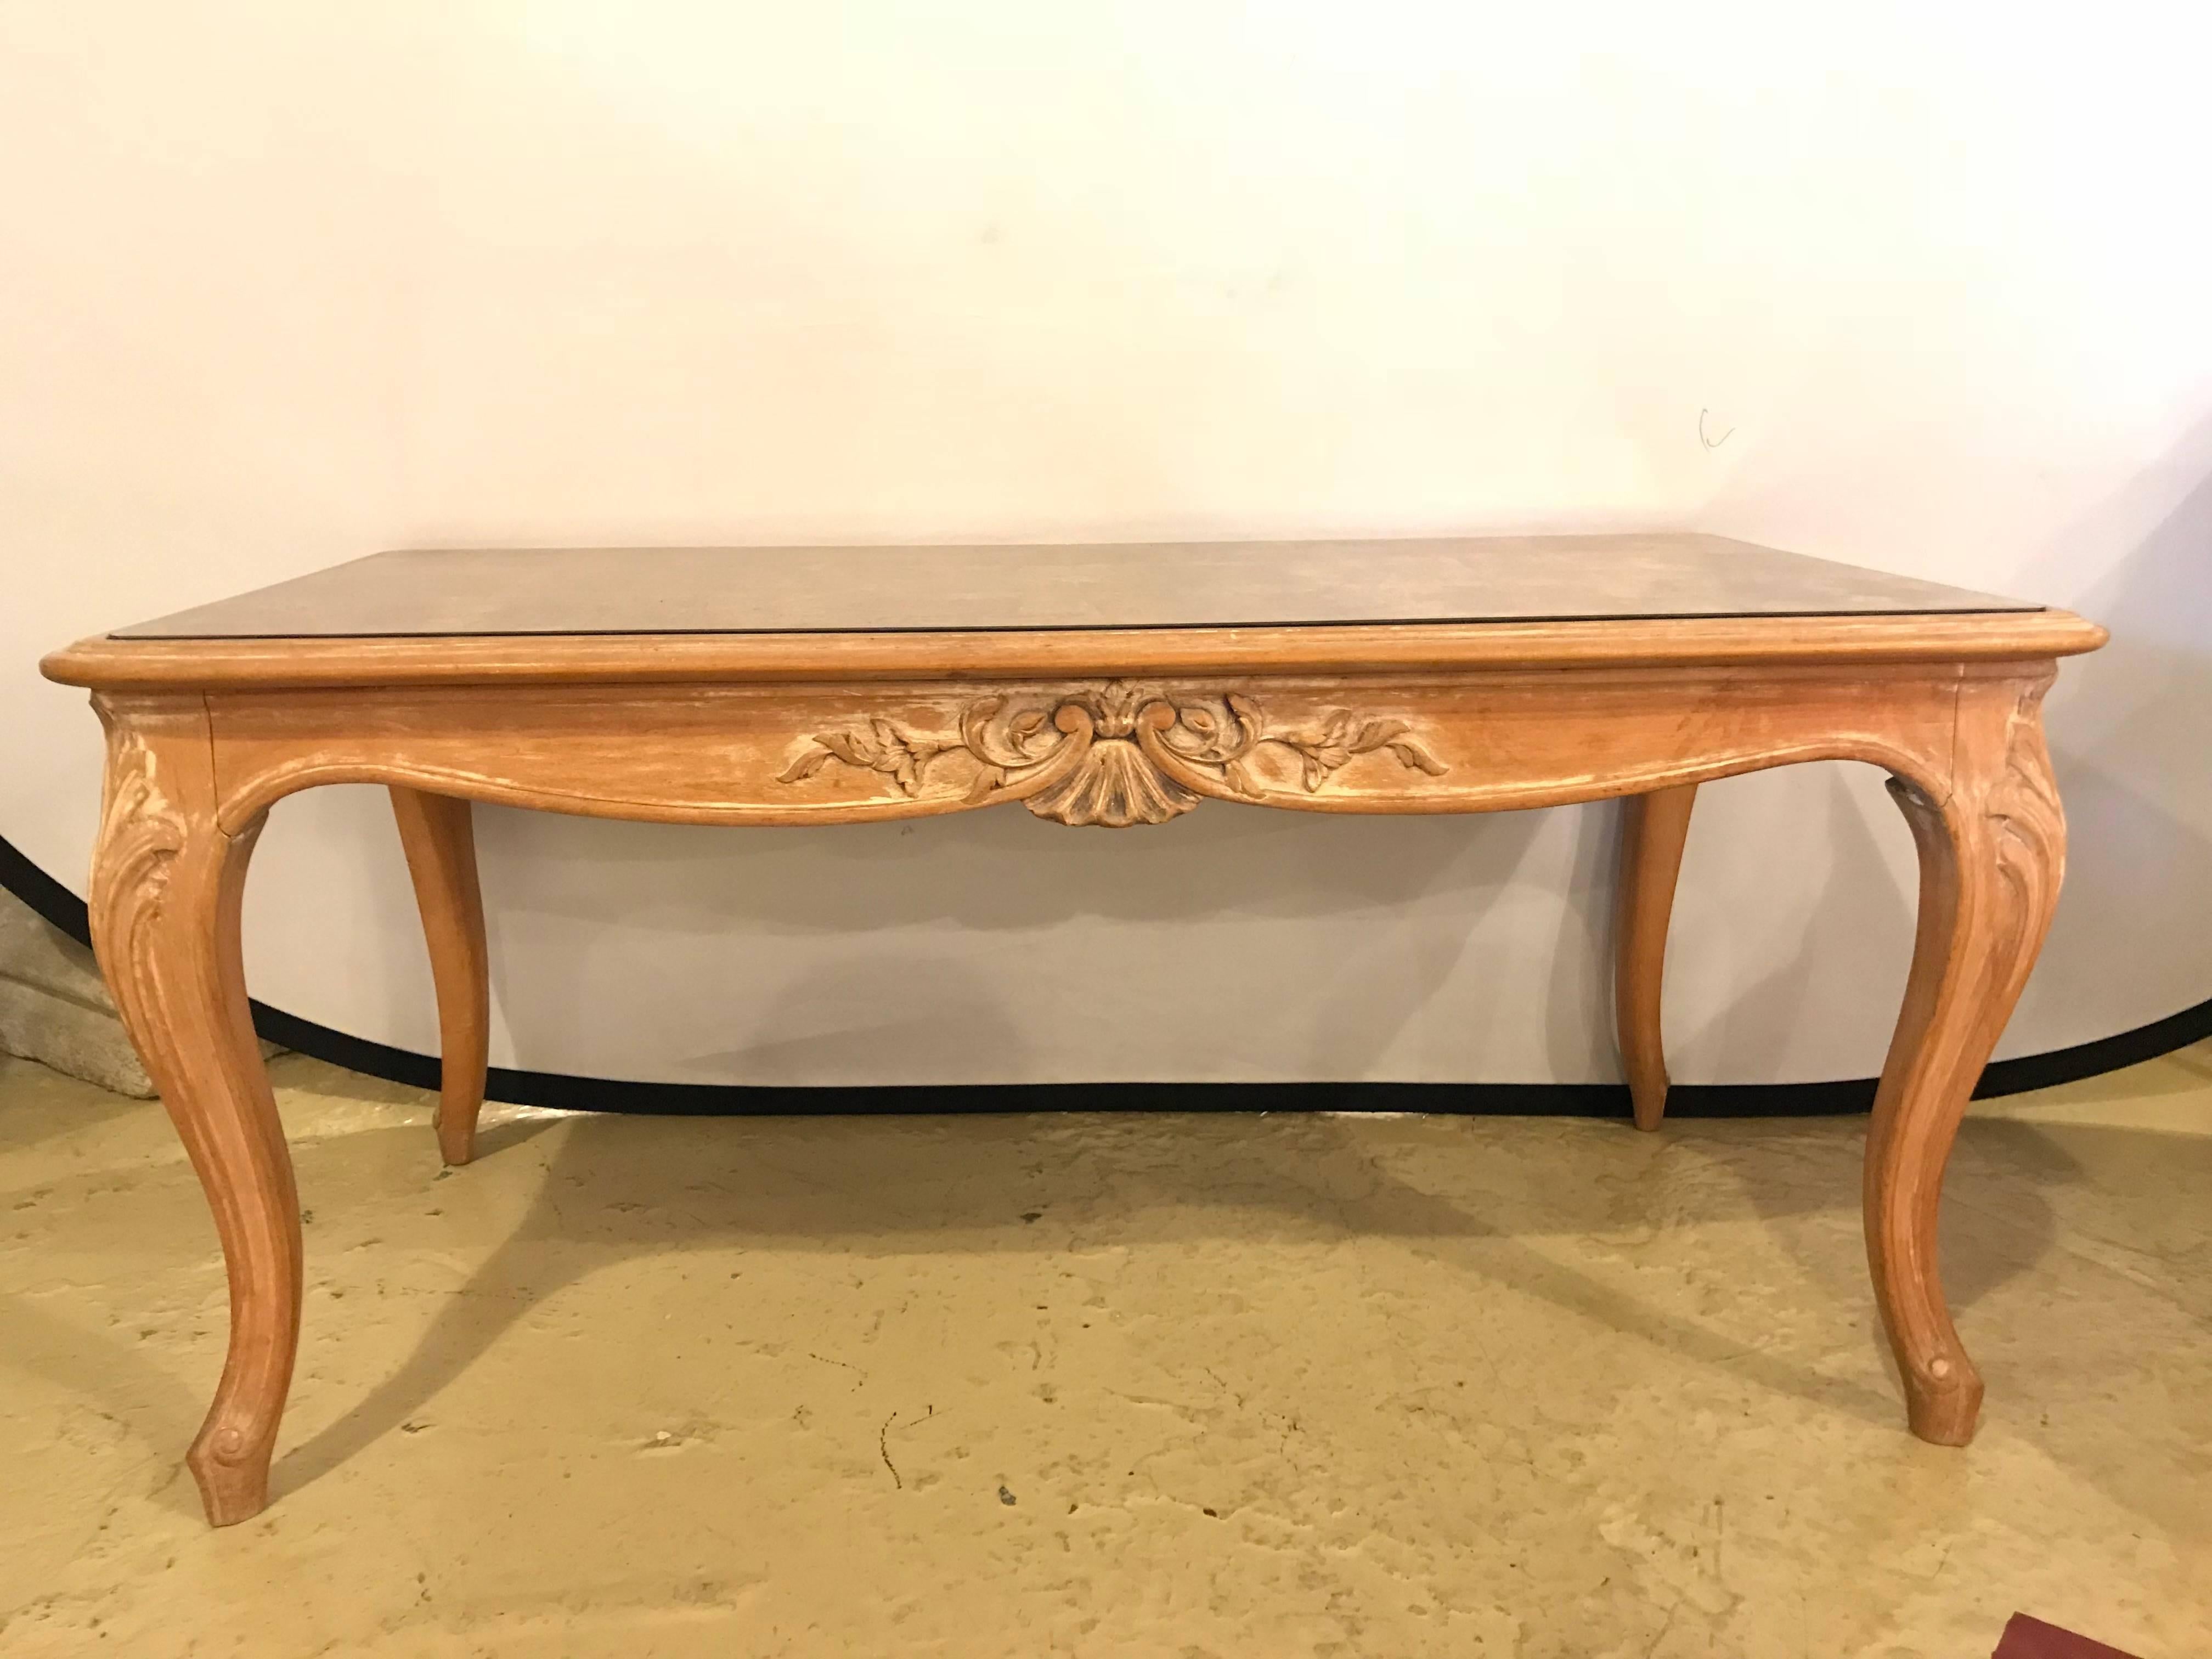 A Louis XV style white washed coffee table with decorated gilt gold glass top. Hollywood Regency at its finest. This wonderfully carved and detailed coffee or low table is simply stunning and is certain to shine in most any home.